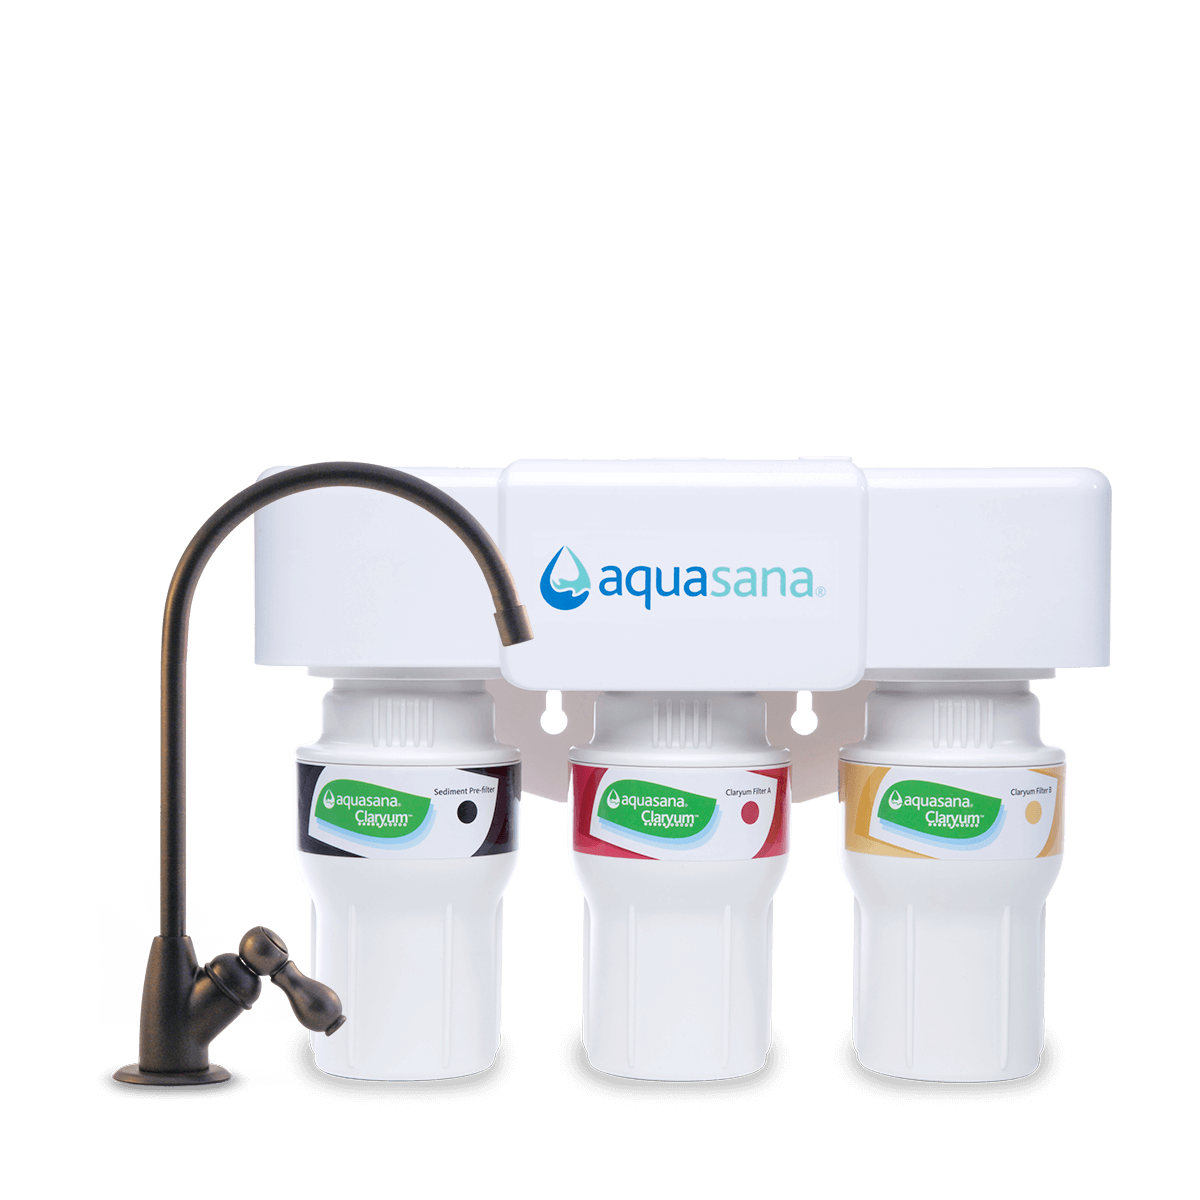 Aquasana 3-Stage Under Sink Water Filter, Oil Rubbed Bronze, 1/2 Year/600 Gallon